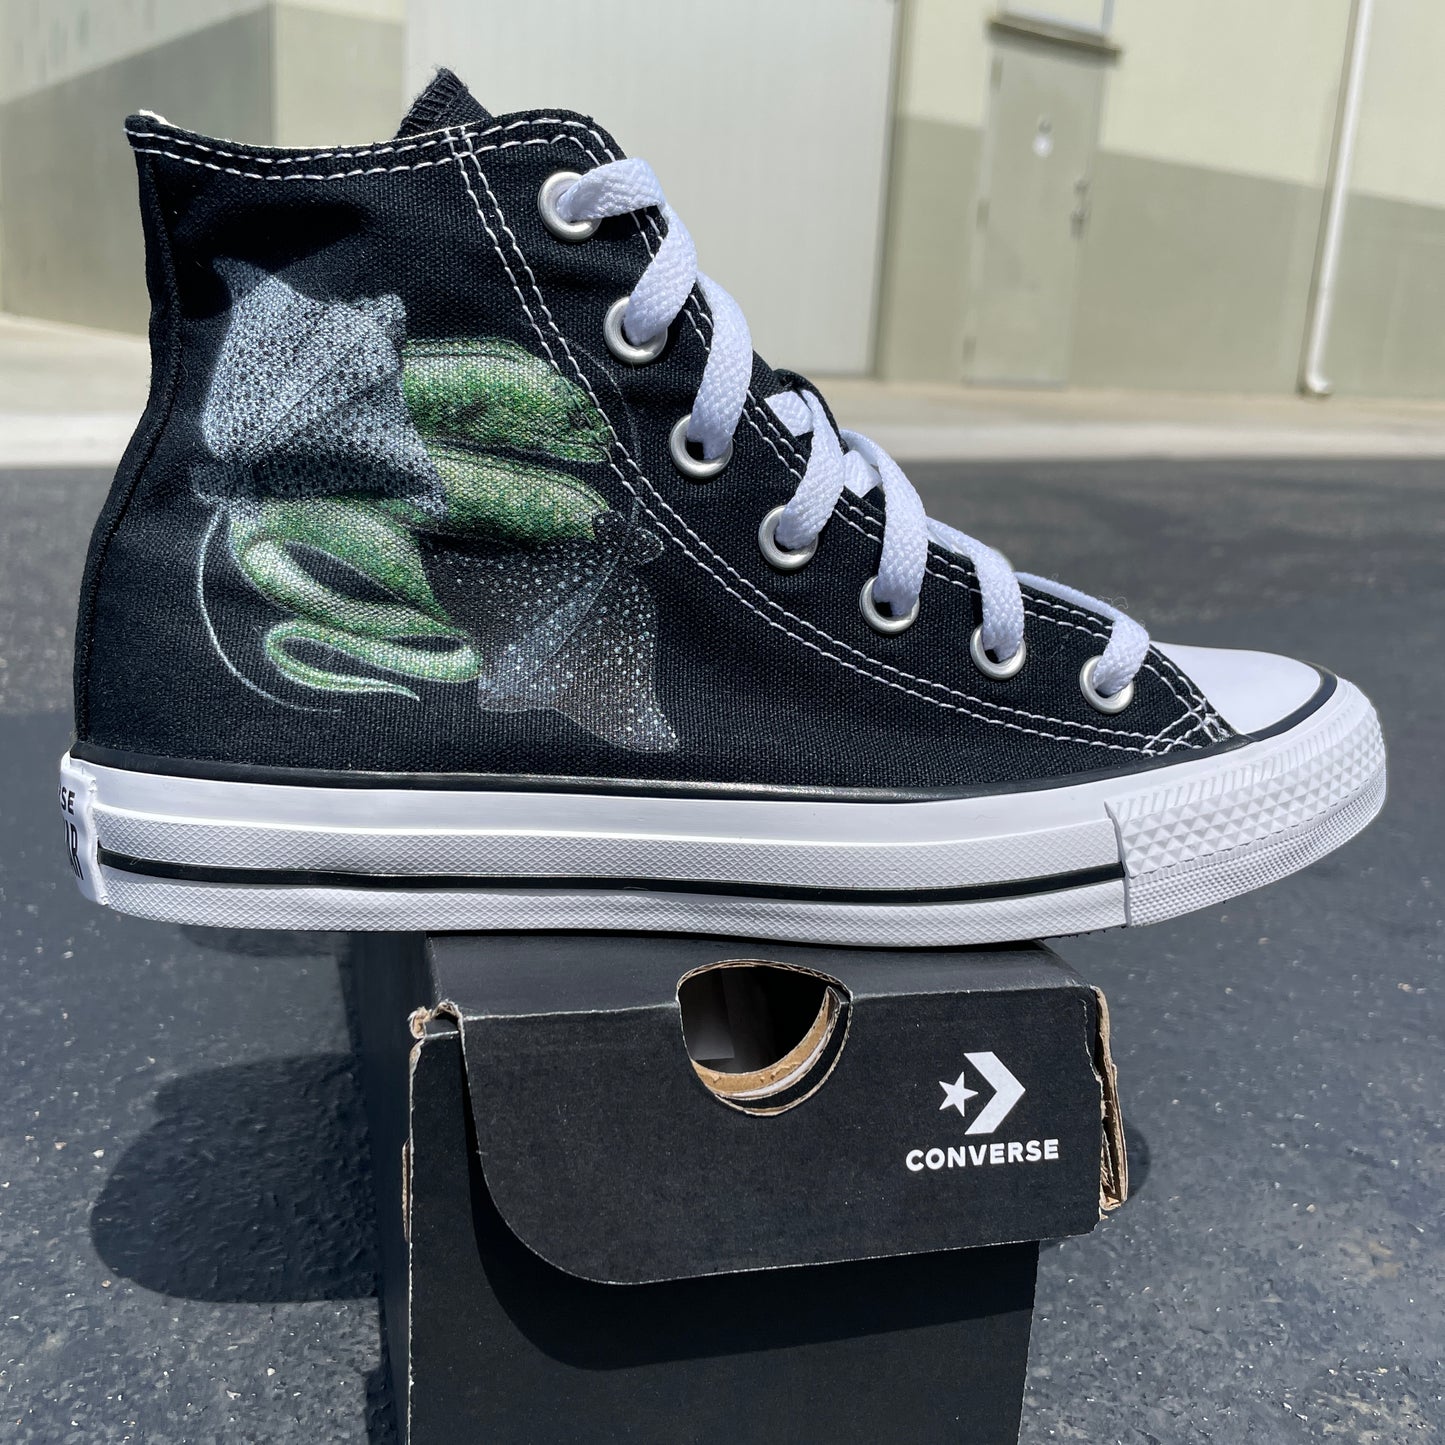 Custom Converse Shoes - Ebb and Flow High Tops - Black Or White